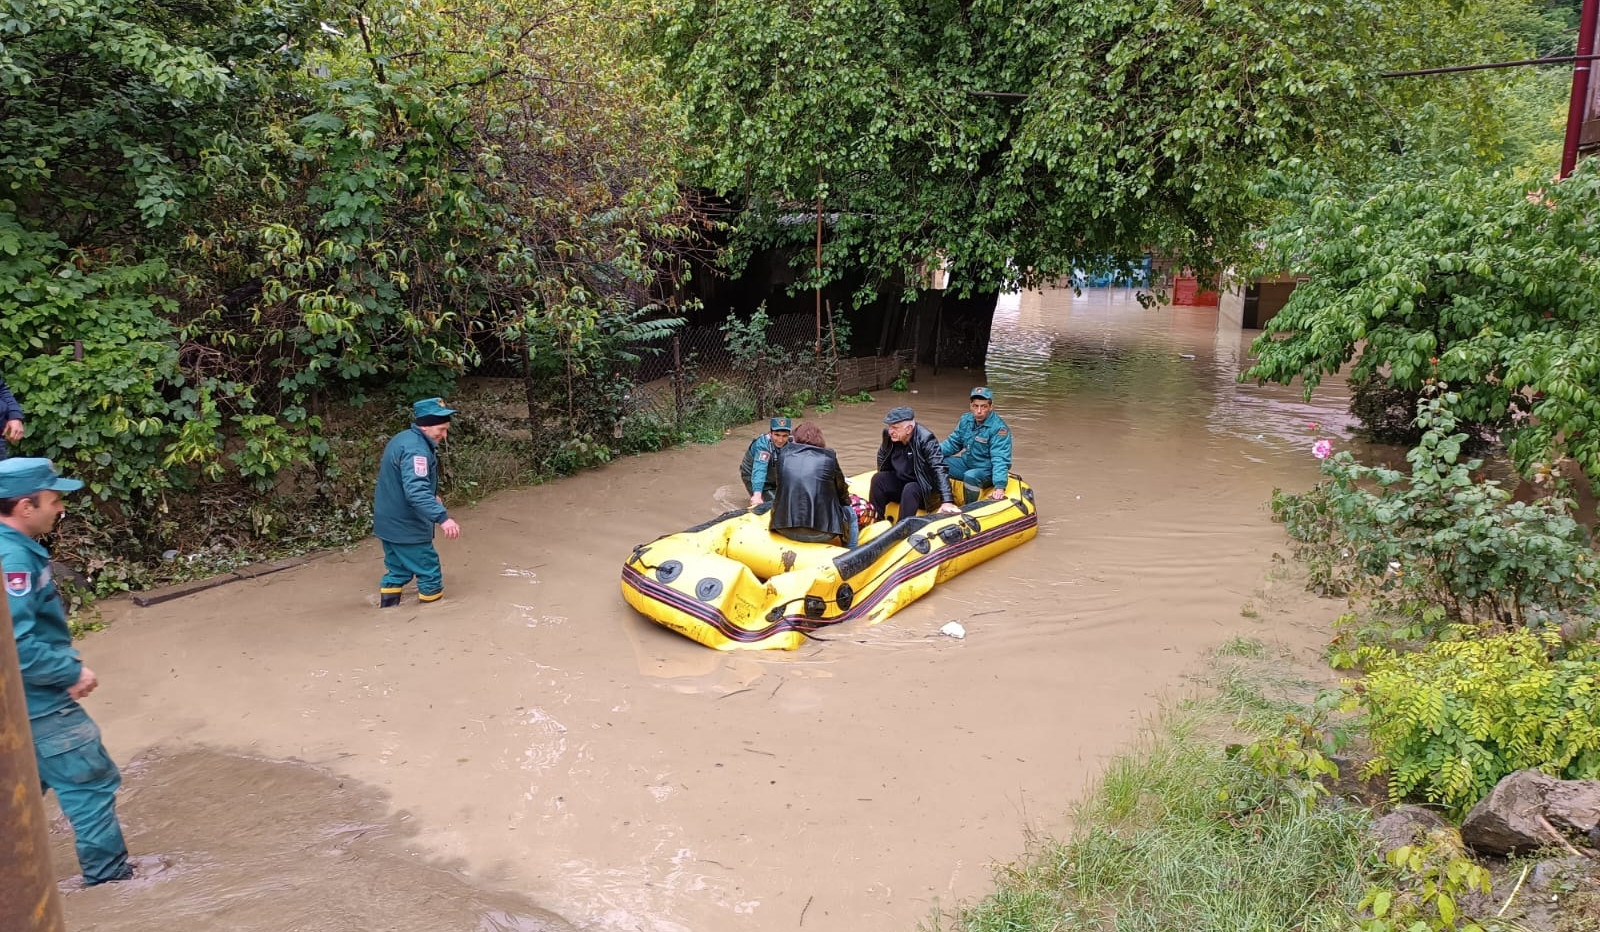 At 15:30, 73 people were rescued and 190 were evacuated in Lori and Tavush, Interior Ministry of Armenia